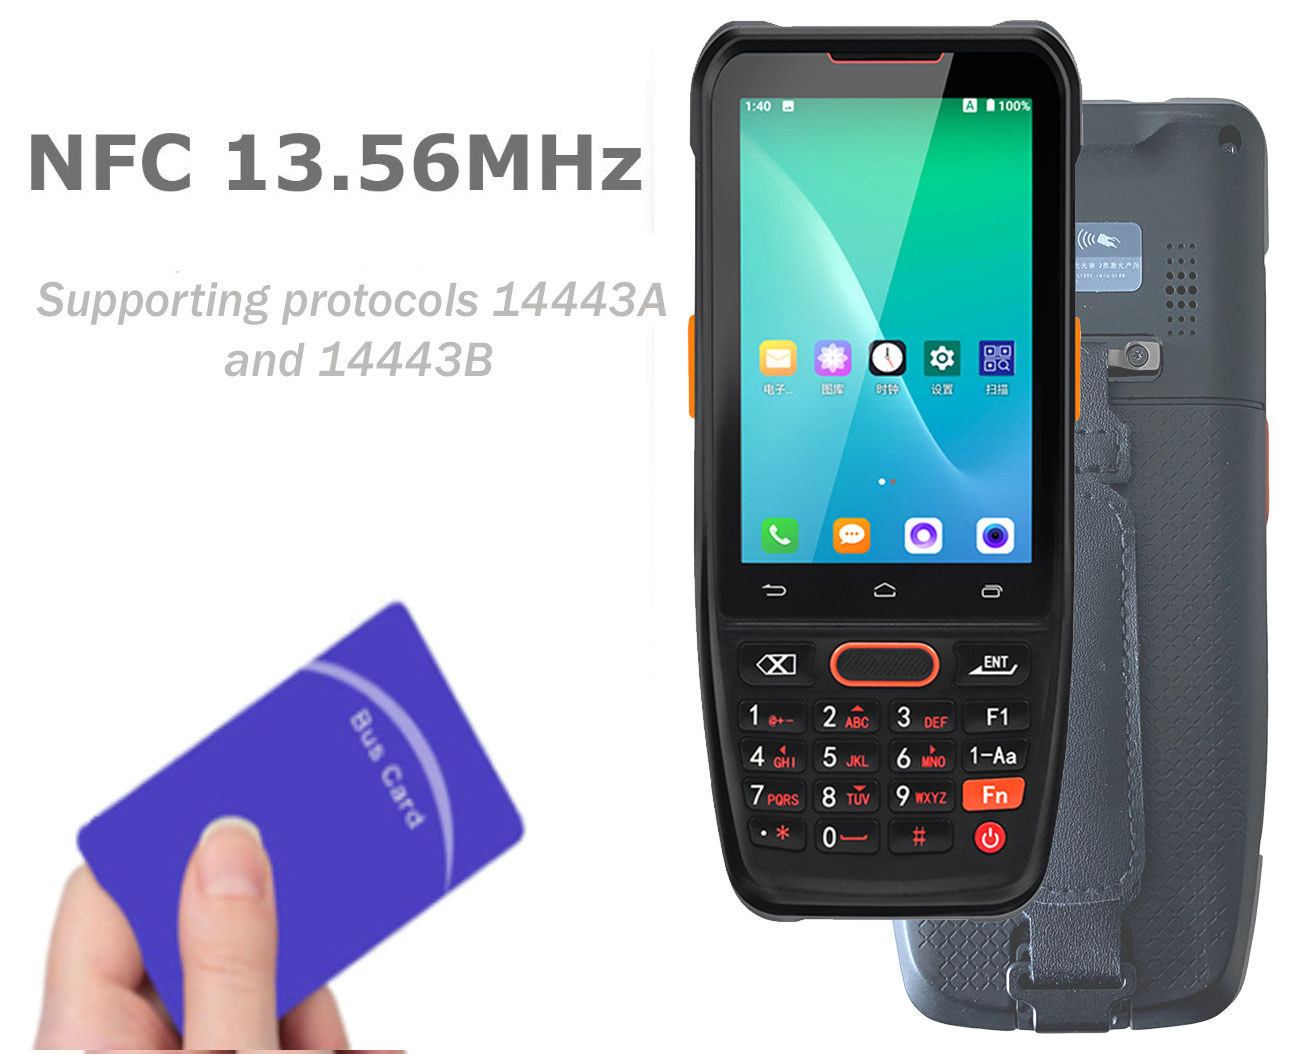 multitask data collector Senter ST917M available with a different NFC version